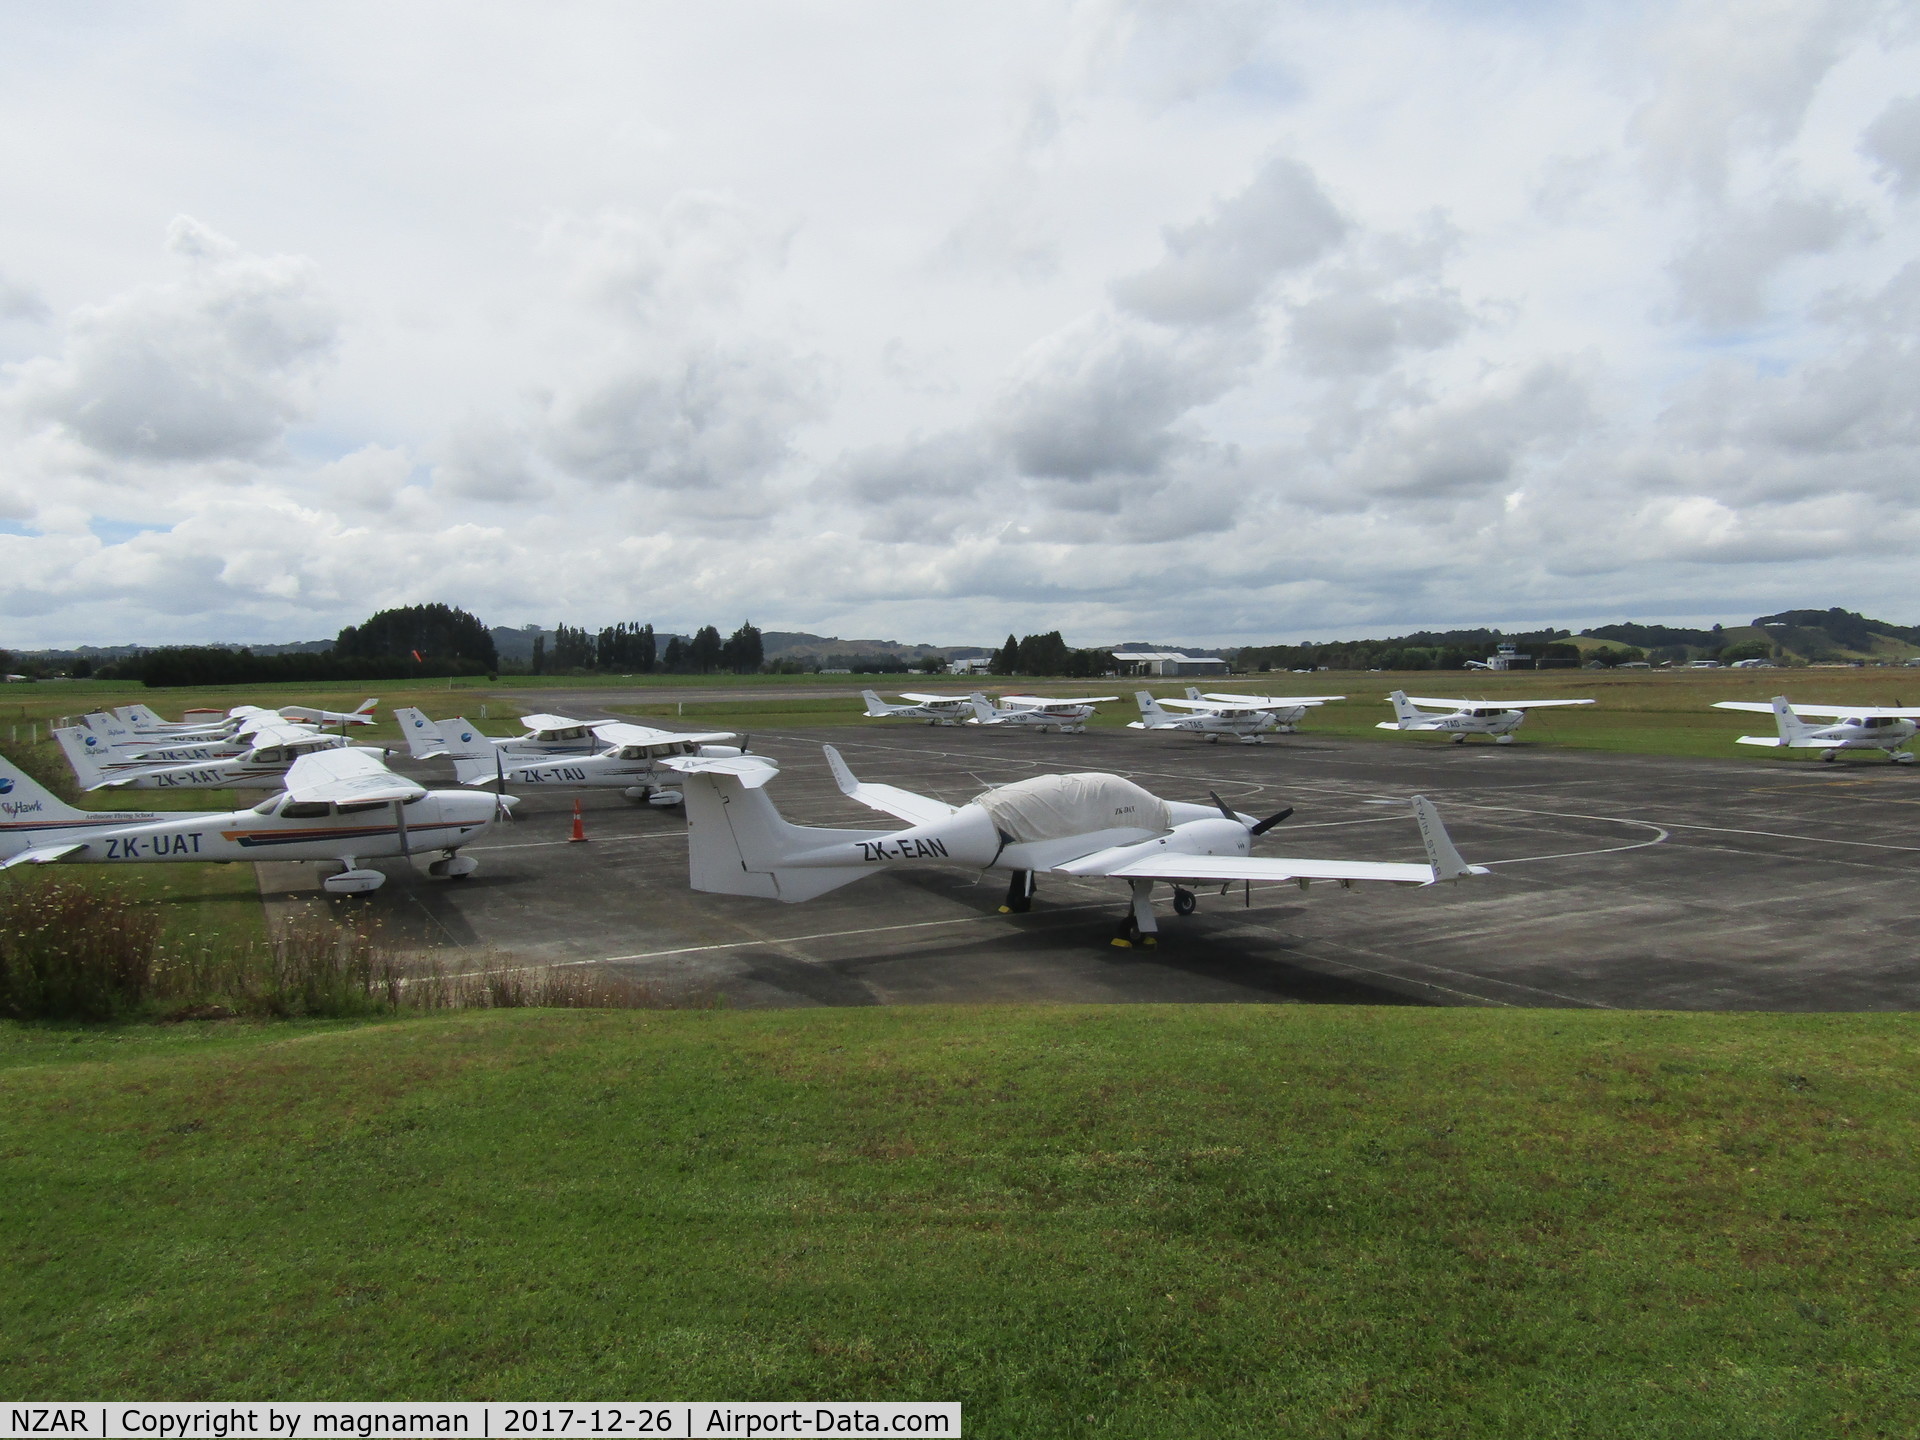 Ardmore Airport, Auckland New Zealand (NZAR) - busy (closed) flying school ramp today